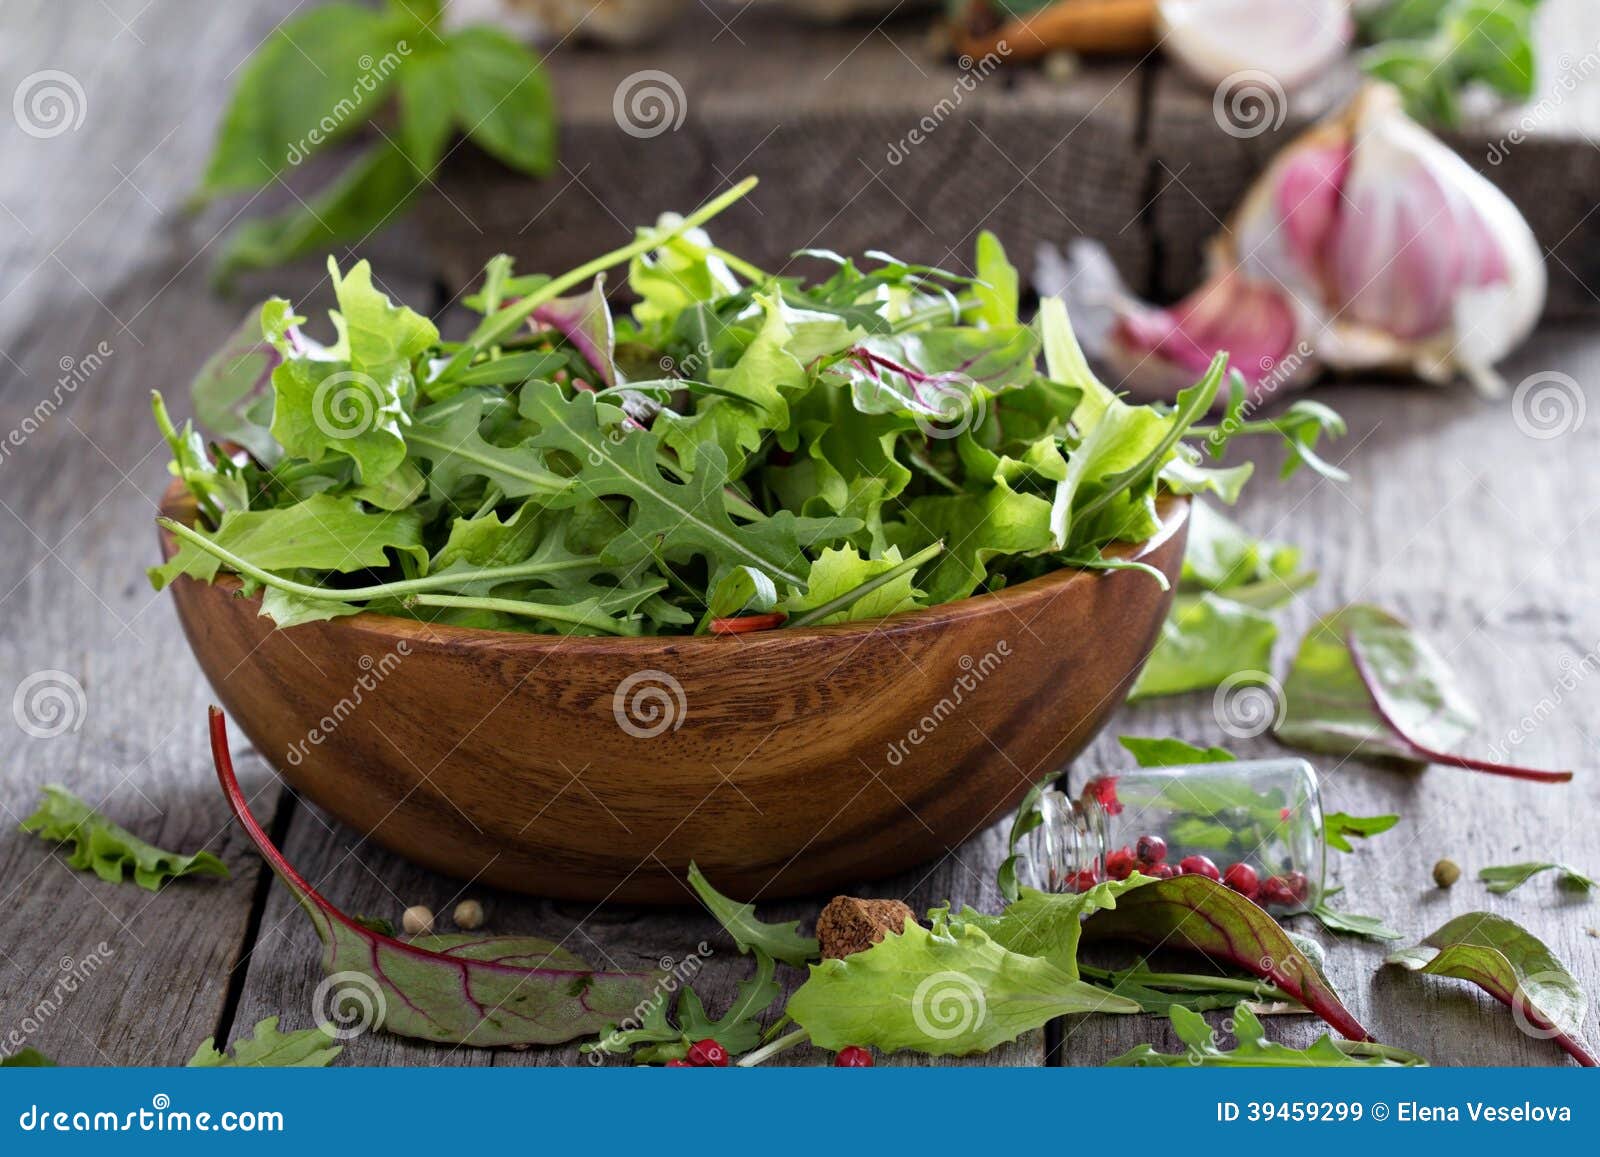 green salad leaves in a wooden bowl